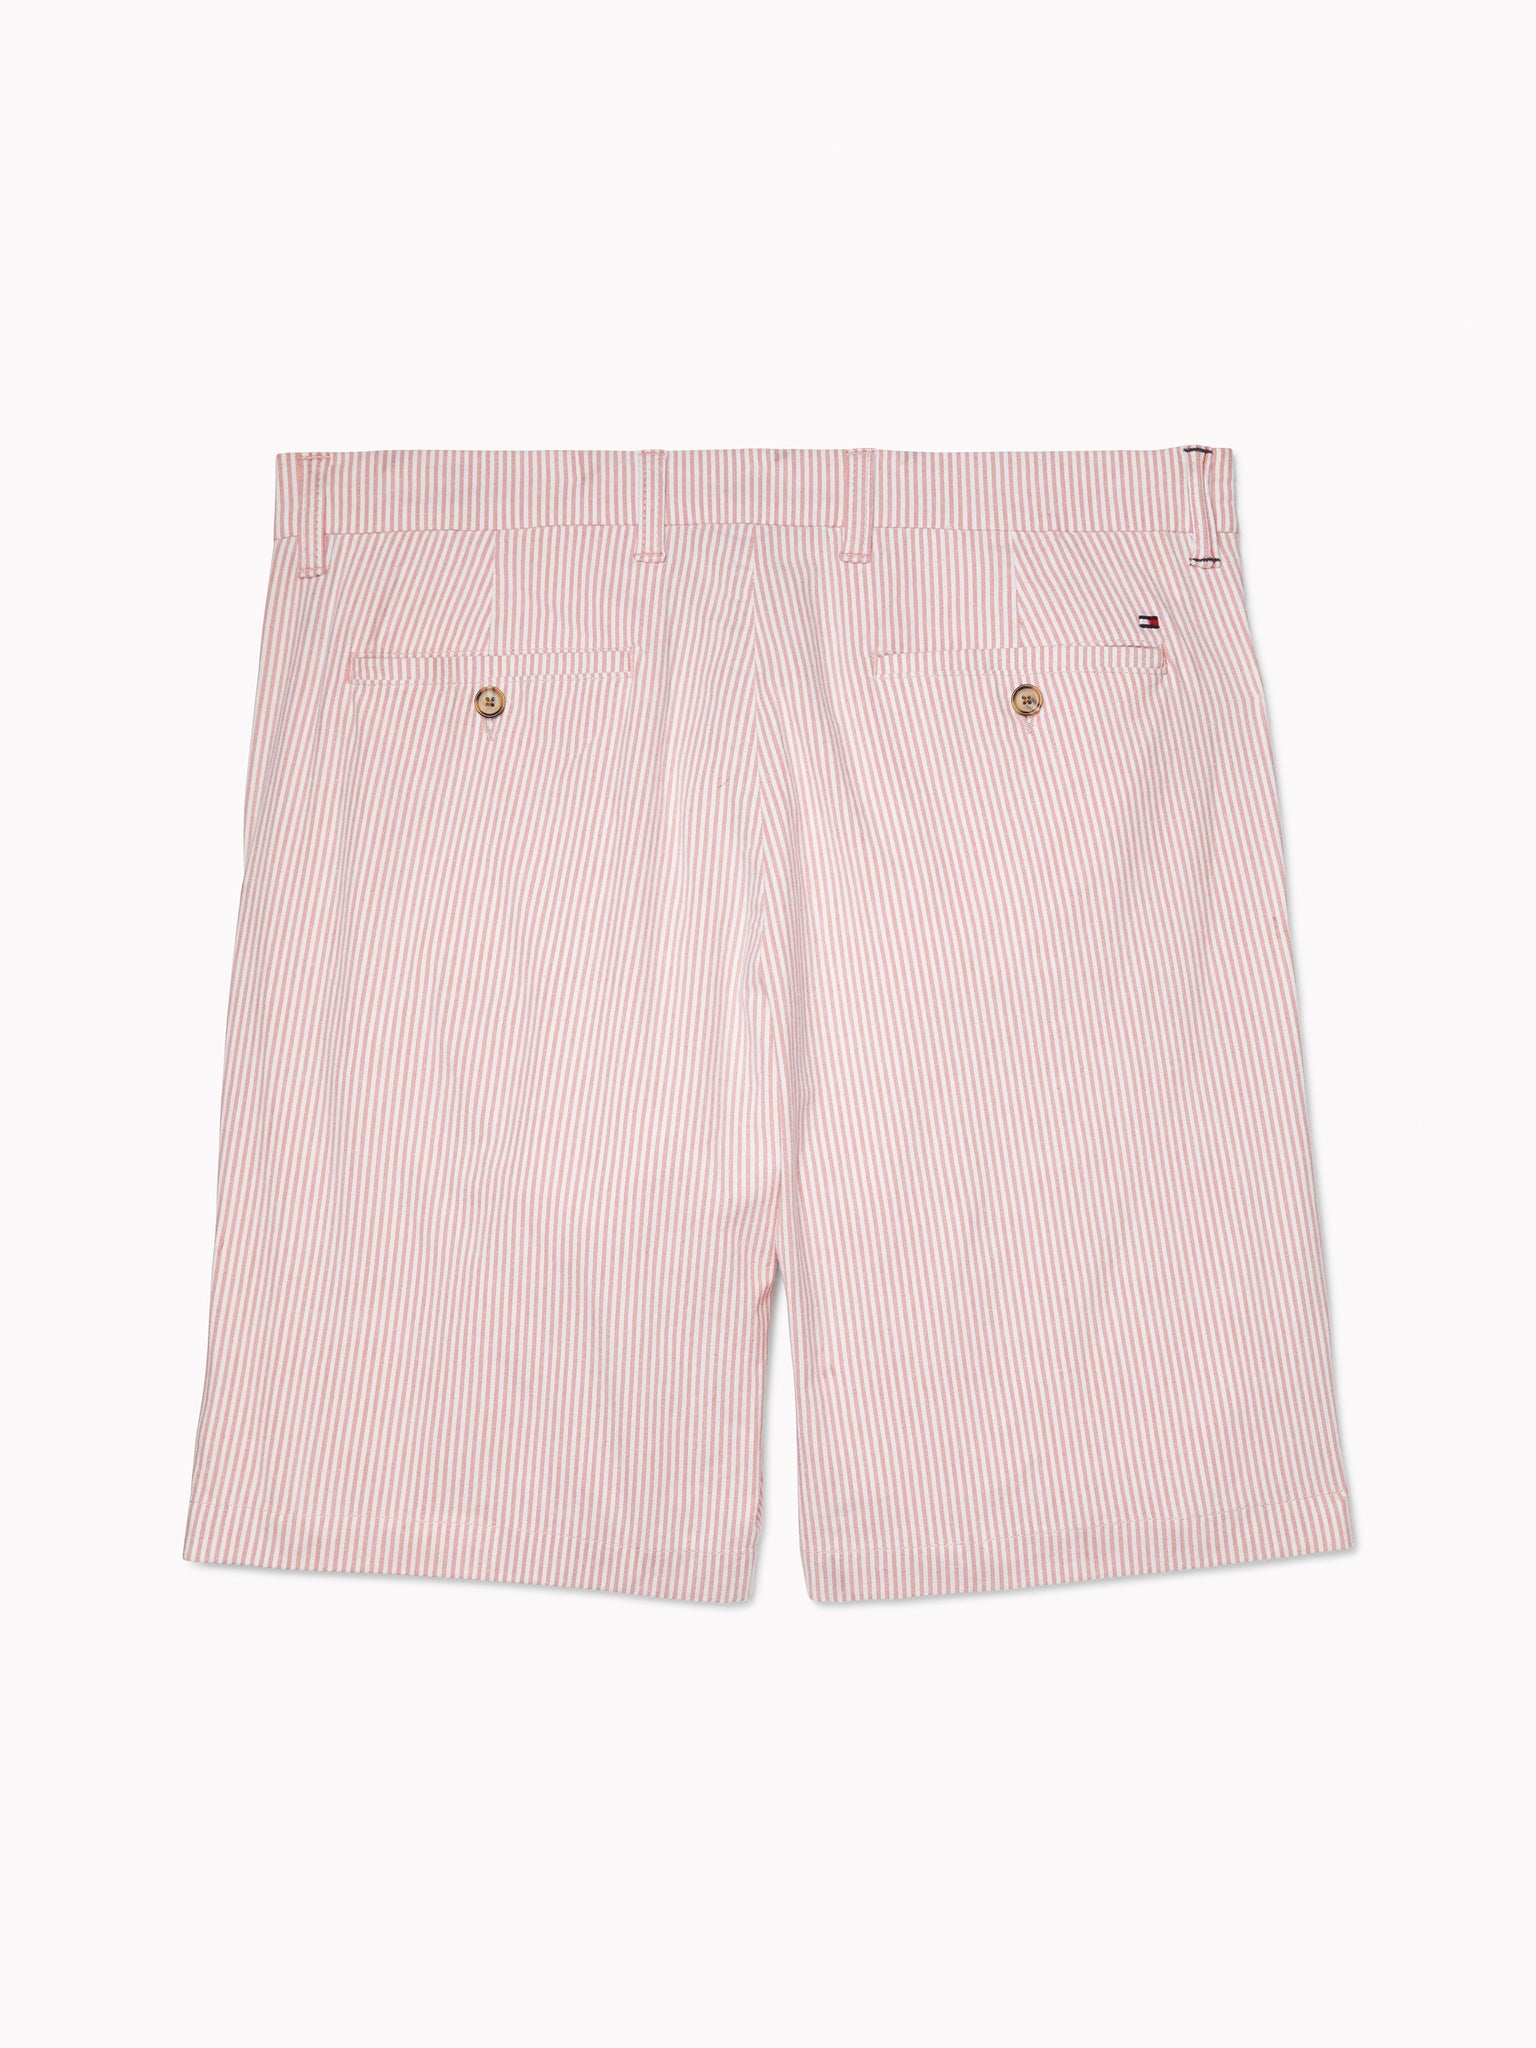 Ithaca Shorts (Mens) - Red & White